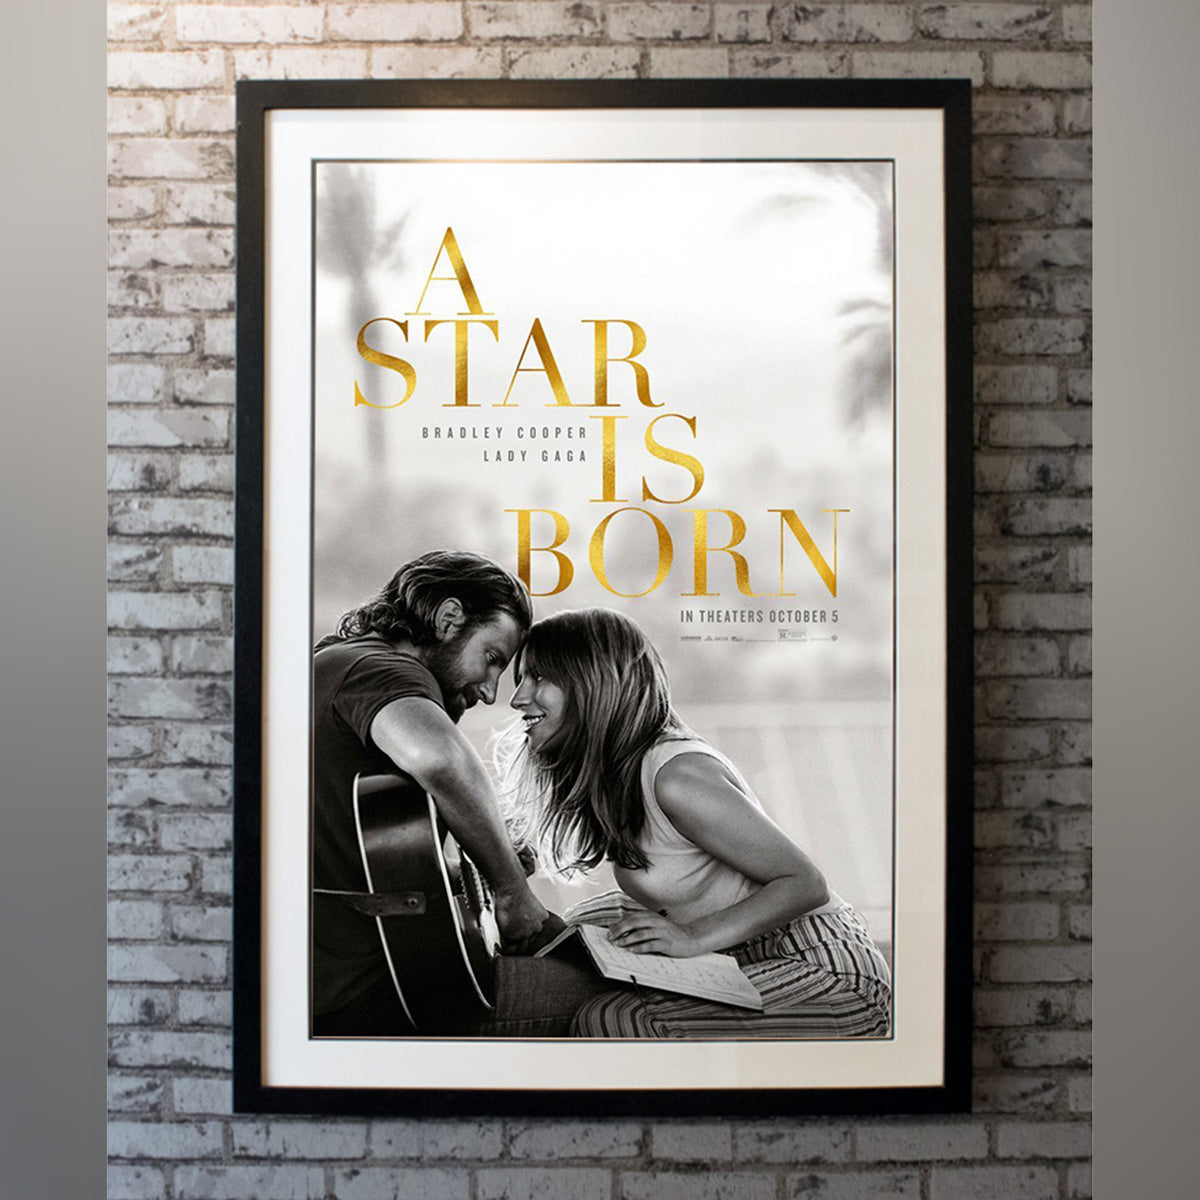 Original Movie Poster of A Star Is Born (2018)